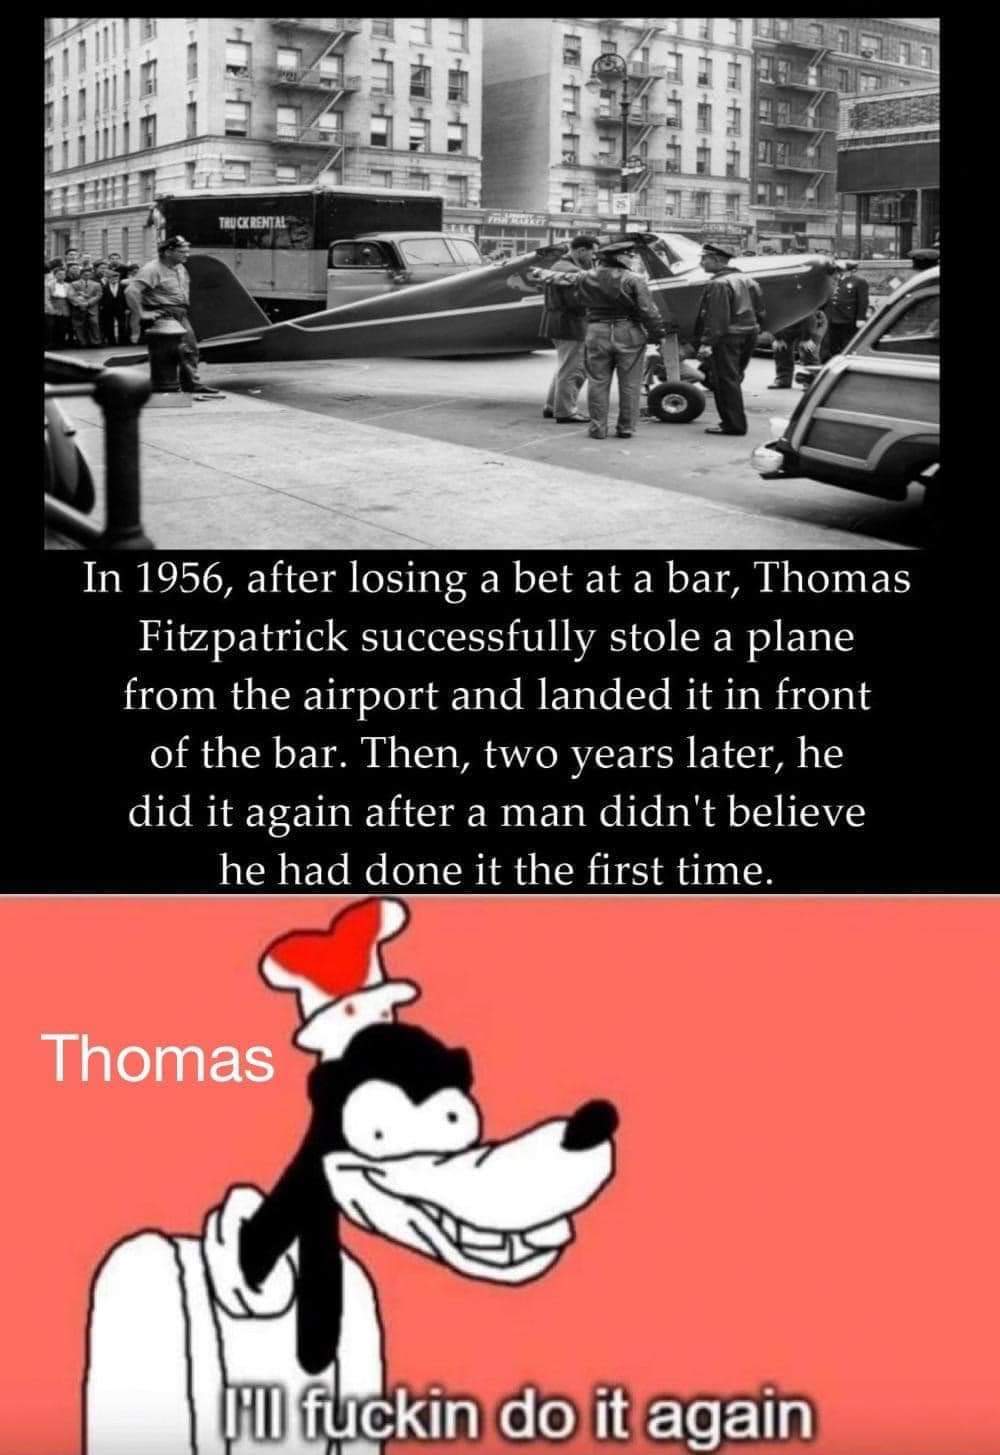 It was time for Thomas to leave, he had a plane to steal because Gary didn't fuckin believe him. - meme